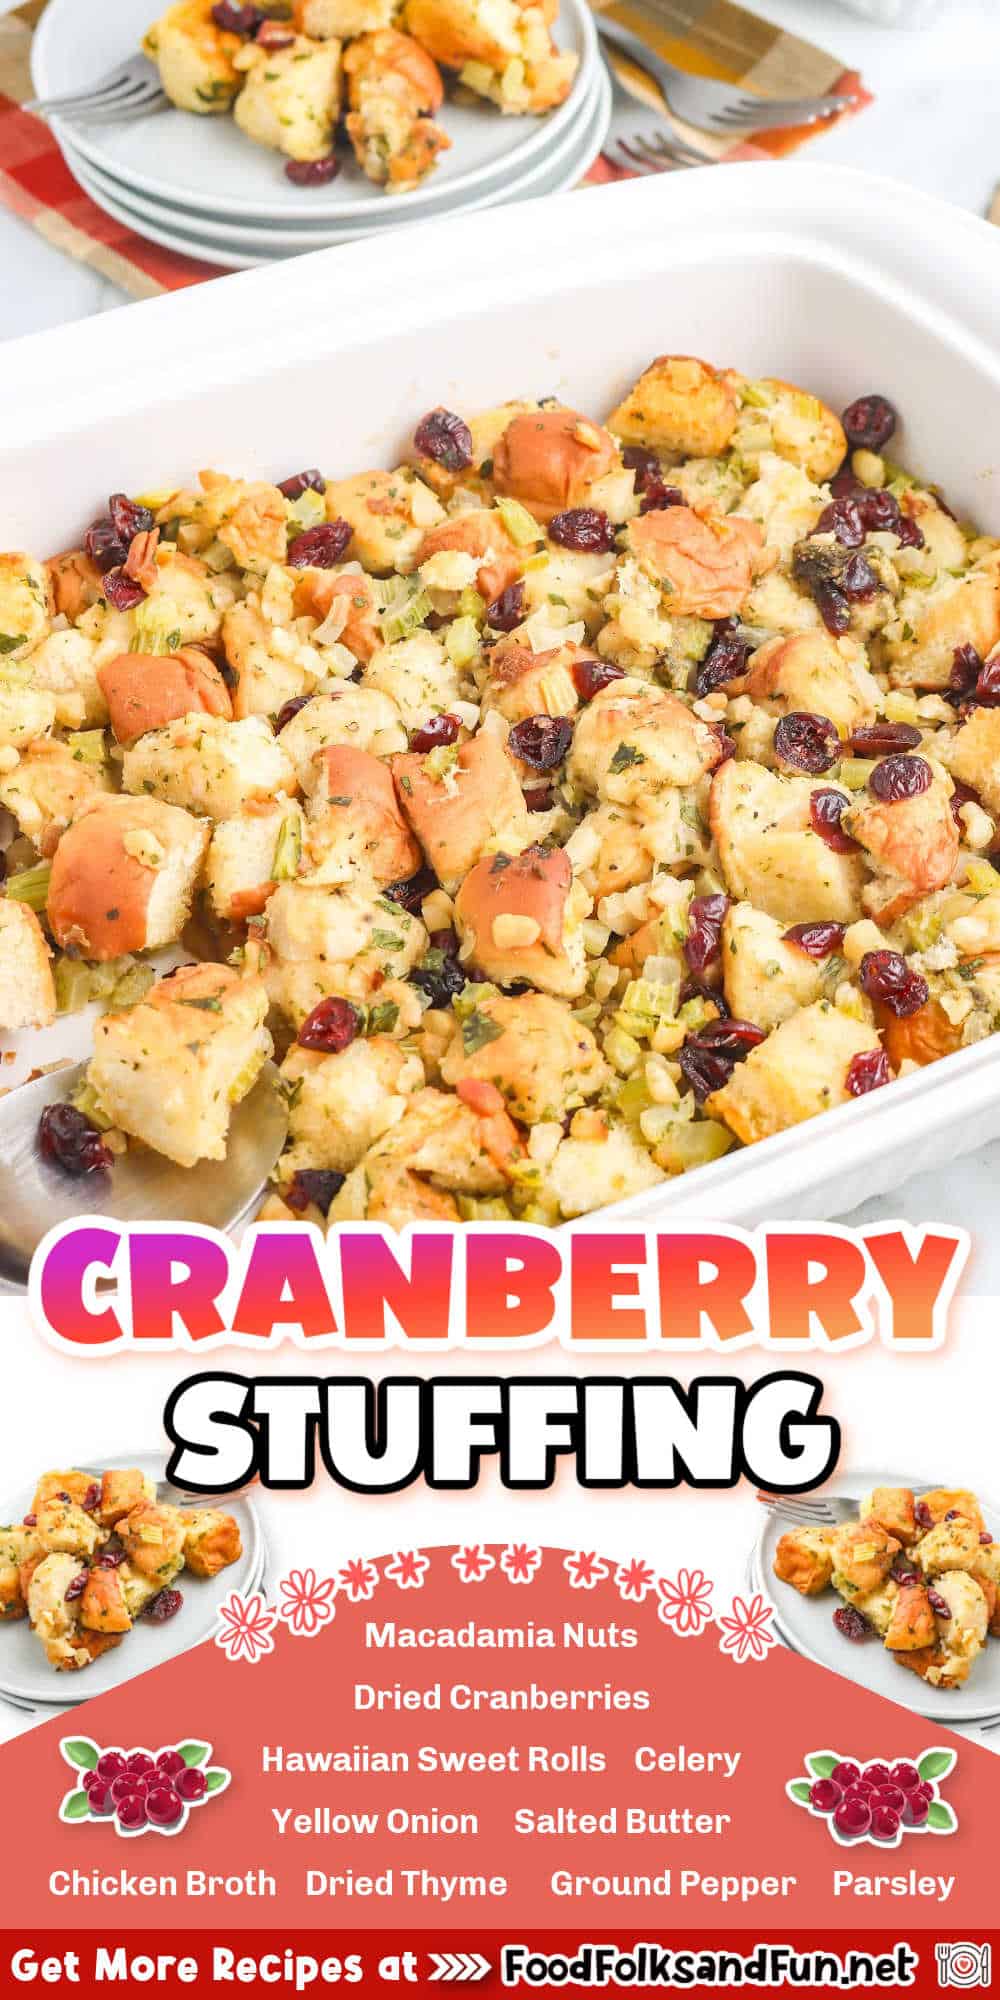 This cranberry macadamia nut stuffing is a tasty twist on the classic Thanksgiving stuffing. It’s easy and ready in just an hour!

This recipe costs approximately $9.46 to make and serves eight people. That’s just $1.17 per serving. 

H2 Cranberry Stuffing

Stuffing is one of my favorite side dishes on Thanksgiving, and I wanted to do something unique with it this year. That’s where this cranberry stuffing recipe came in very handy! It’s made of Hawaiian sweet rolls, cranberries, macadamia nuts, onion, herbs and spices. It is full of all the good stuff!
 
I don’t know about you, but I especially adore when turkey stuffing has golden, crispy edges! Those edges are like icing on the cake, and what helps crisp the edges? Butter substitutes! They seem to taste better in dishes like this. 

Skip the store-bought stuffing mix the next time you need to make stuffing and make this Cranberry Stuffing instead. It is a delicious twist on traditional stuffing and will wow your guests as it tastes better than the same old stuffing you typically make and serve year after year. 

 via @foodfolksandfun